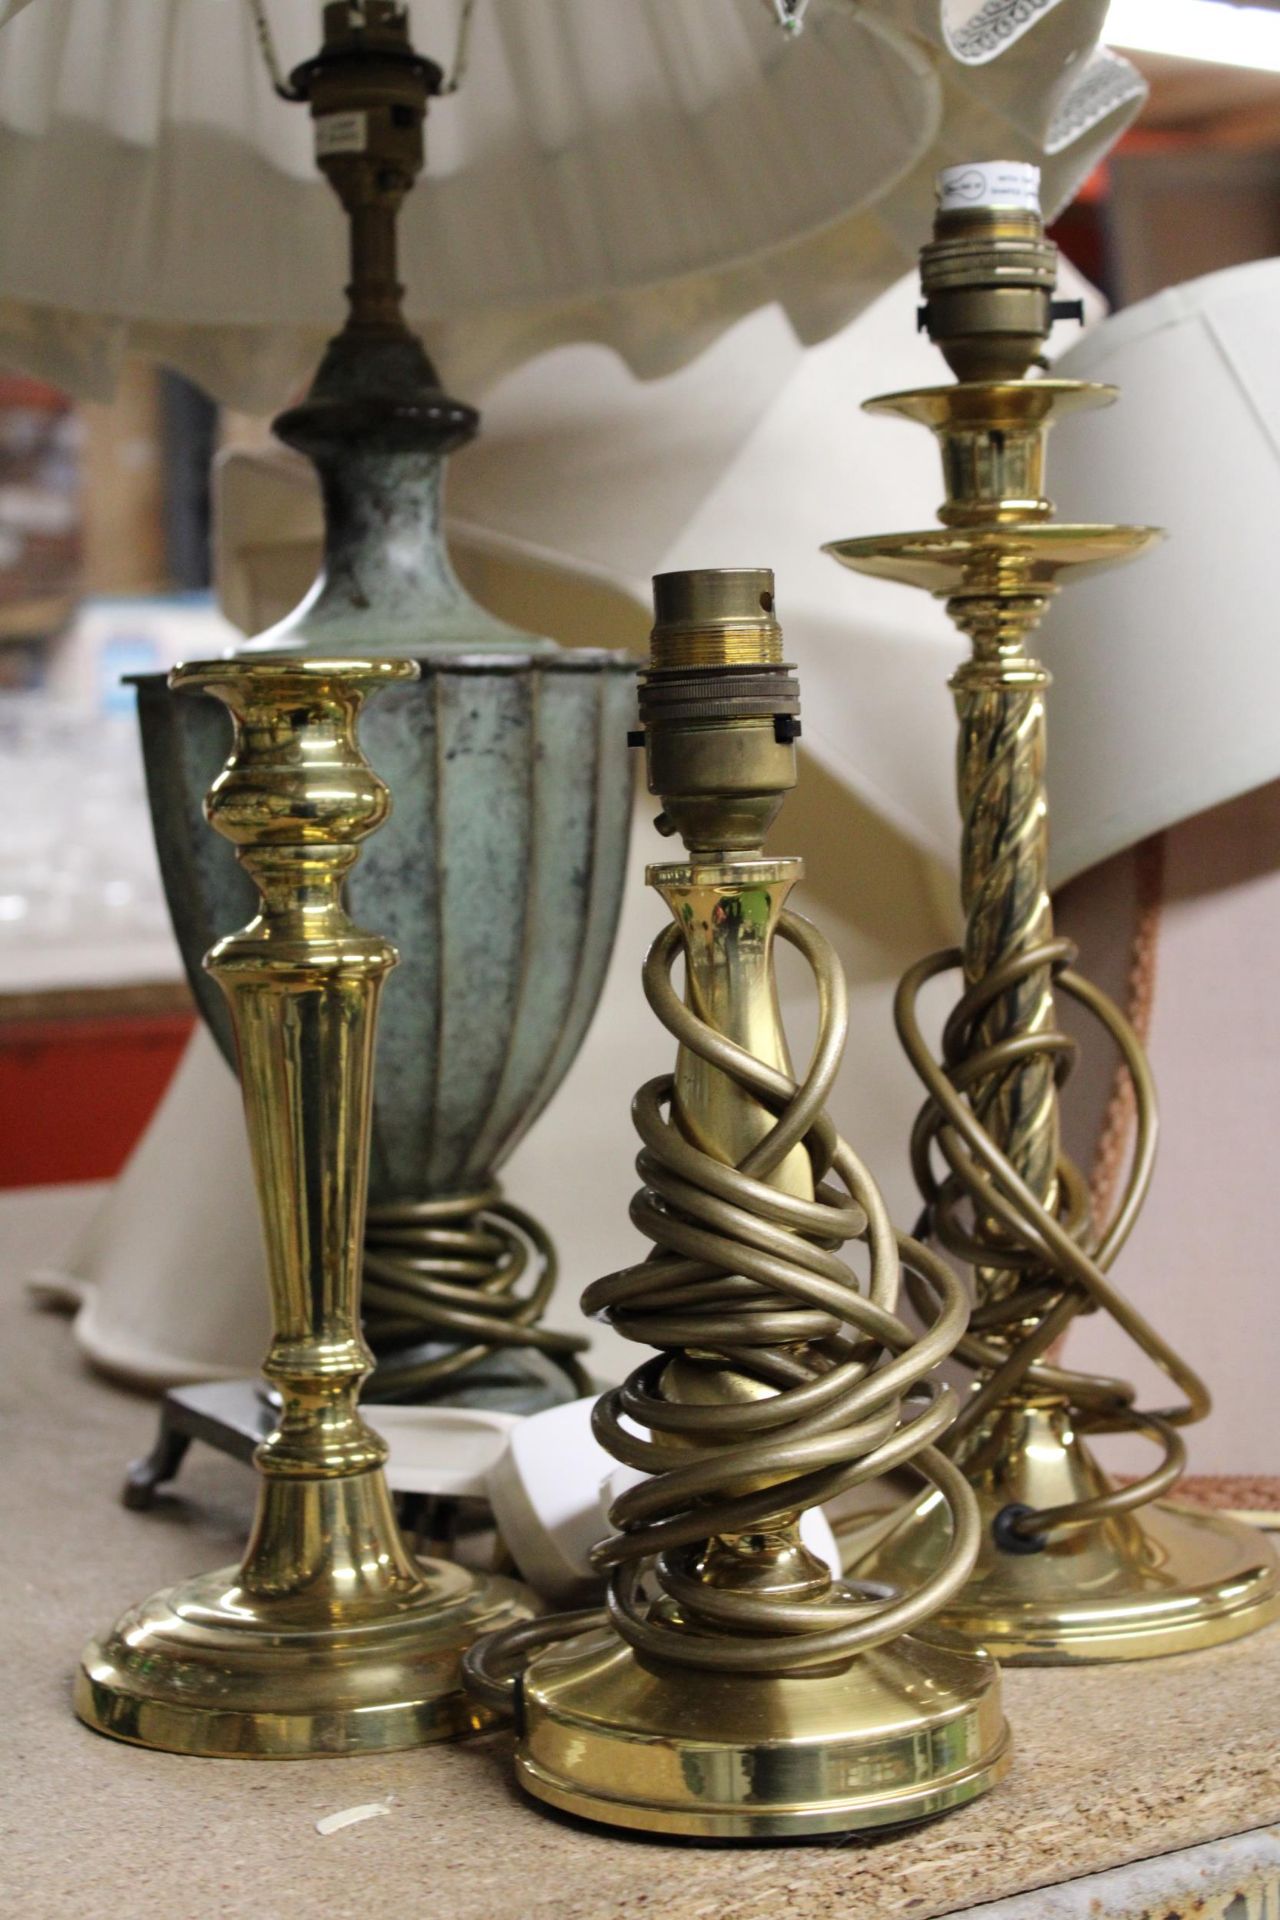 A HEAVY METAL TABLE LAMP WITH CREAM AND FLORAL SHADE, PLUS THREE BRASS TABLE LAMPS AND FOUR SHADES - Image 5 of 5